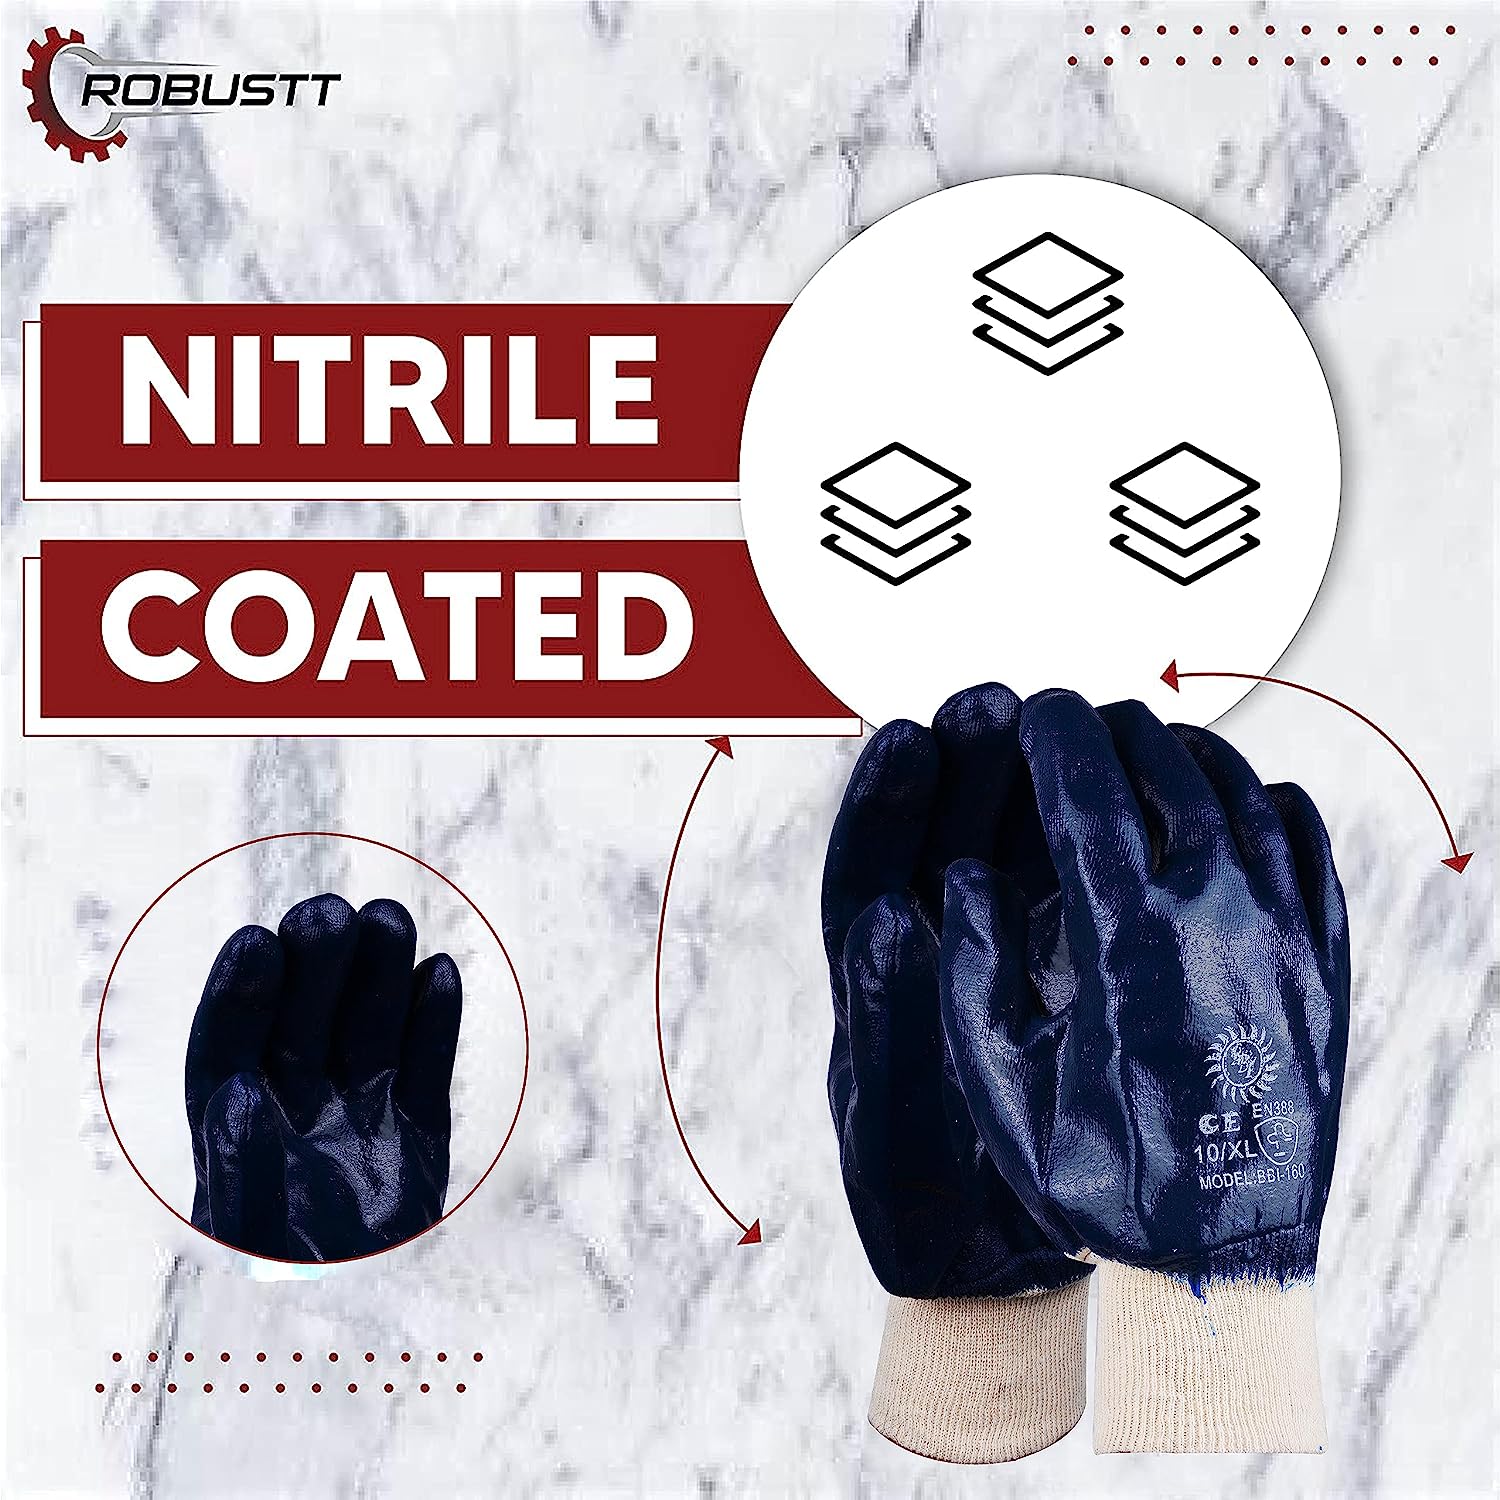 Robustt Industrial Safety Gloves Anti-Cut (Fully Coated Close Cuff) fo